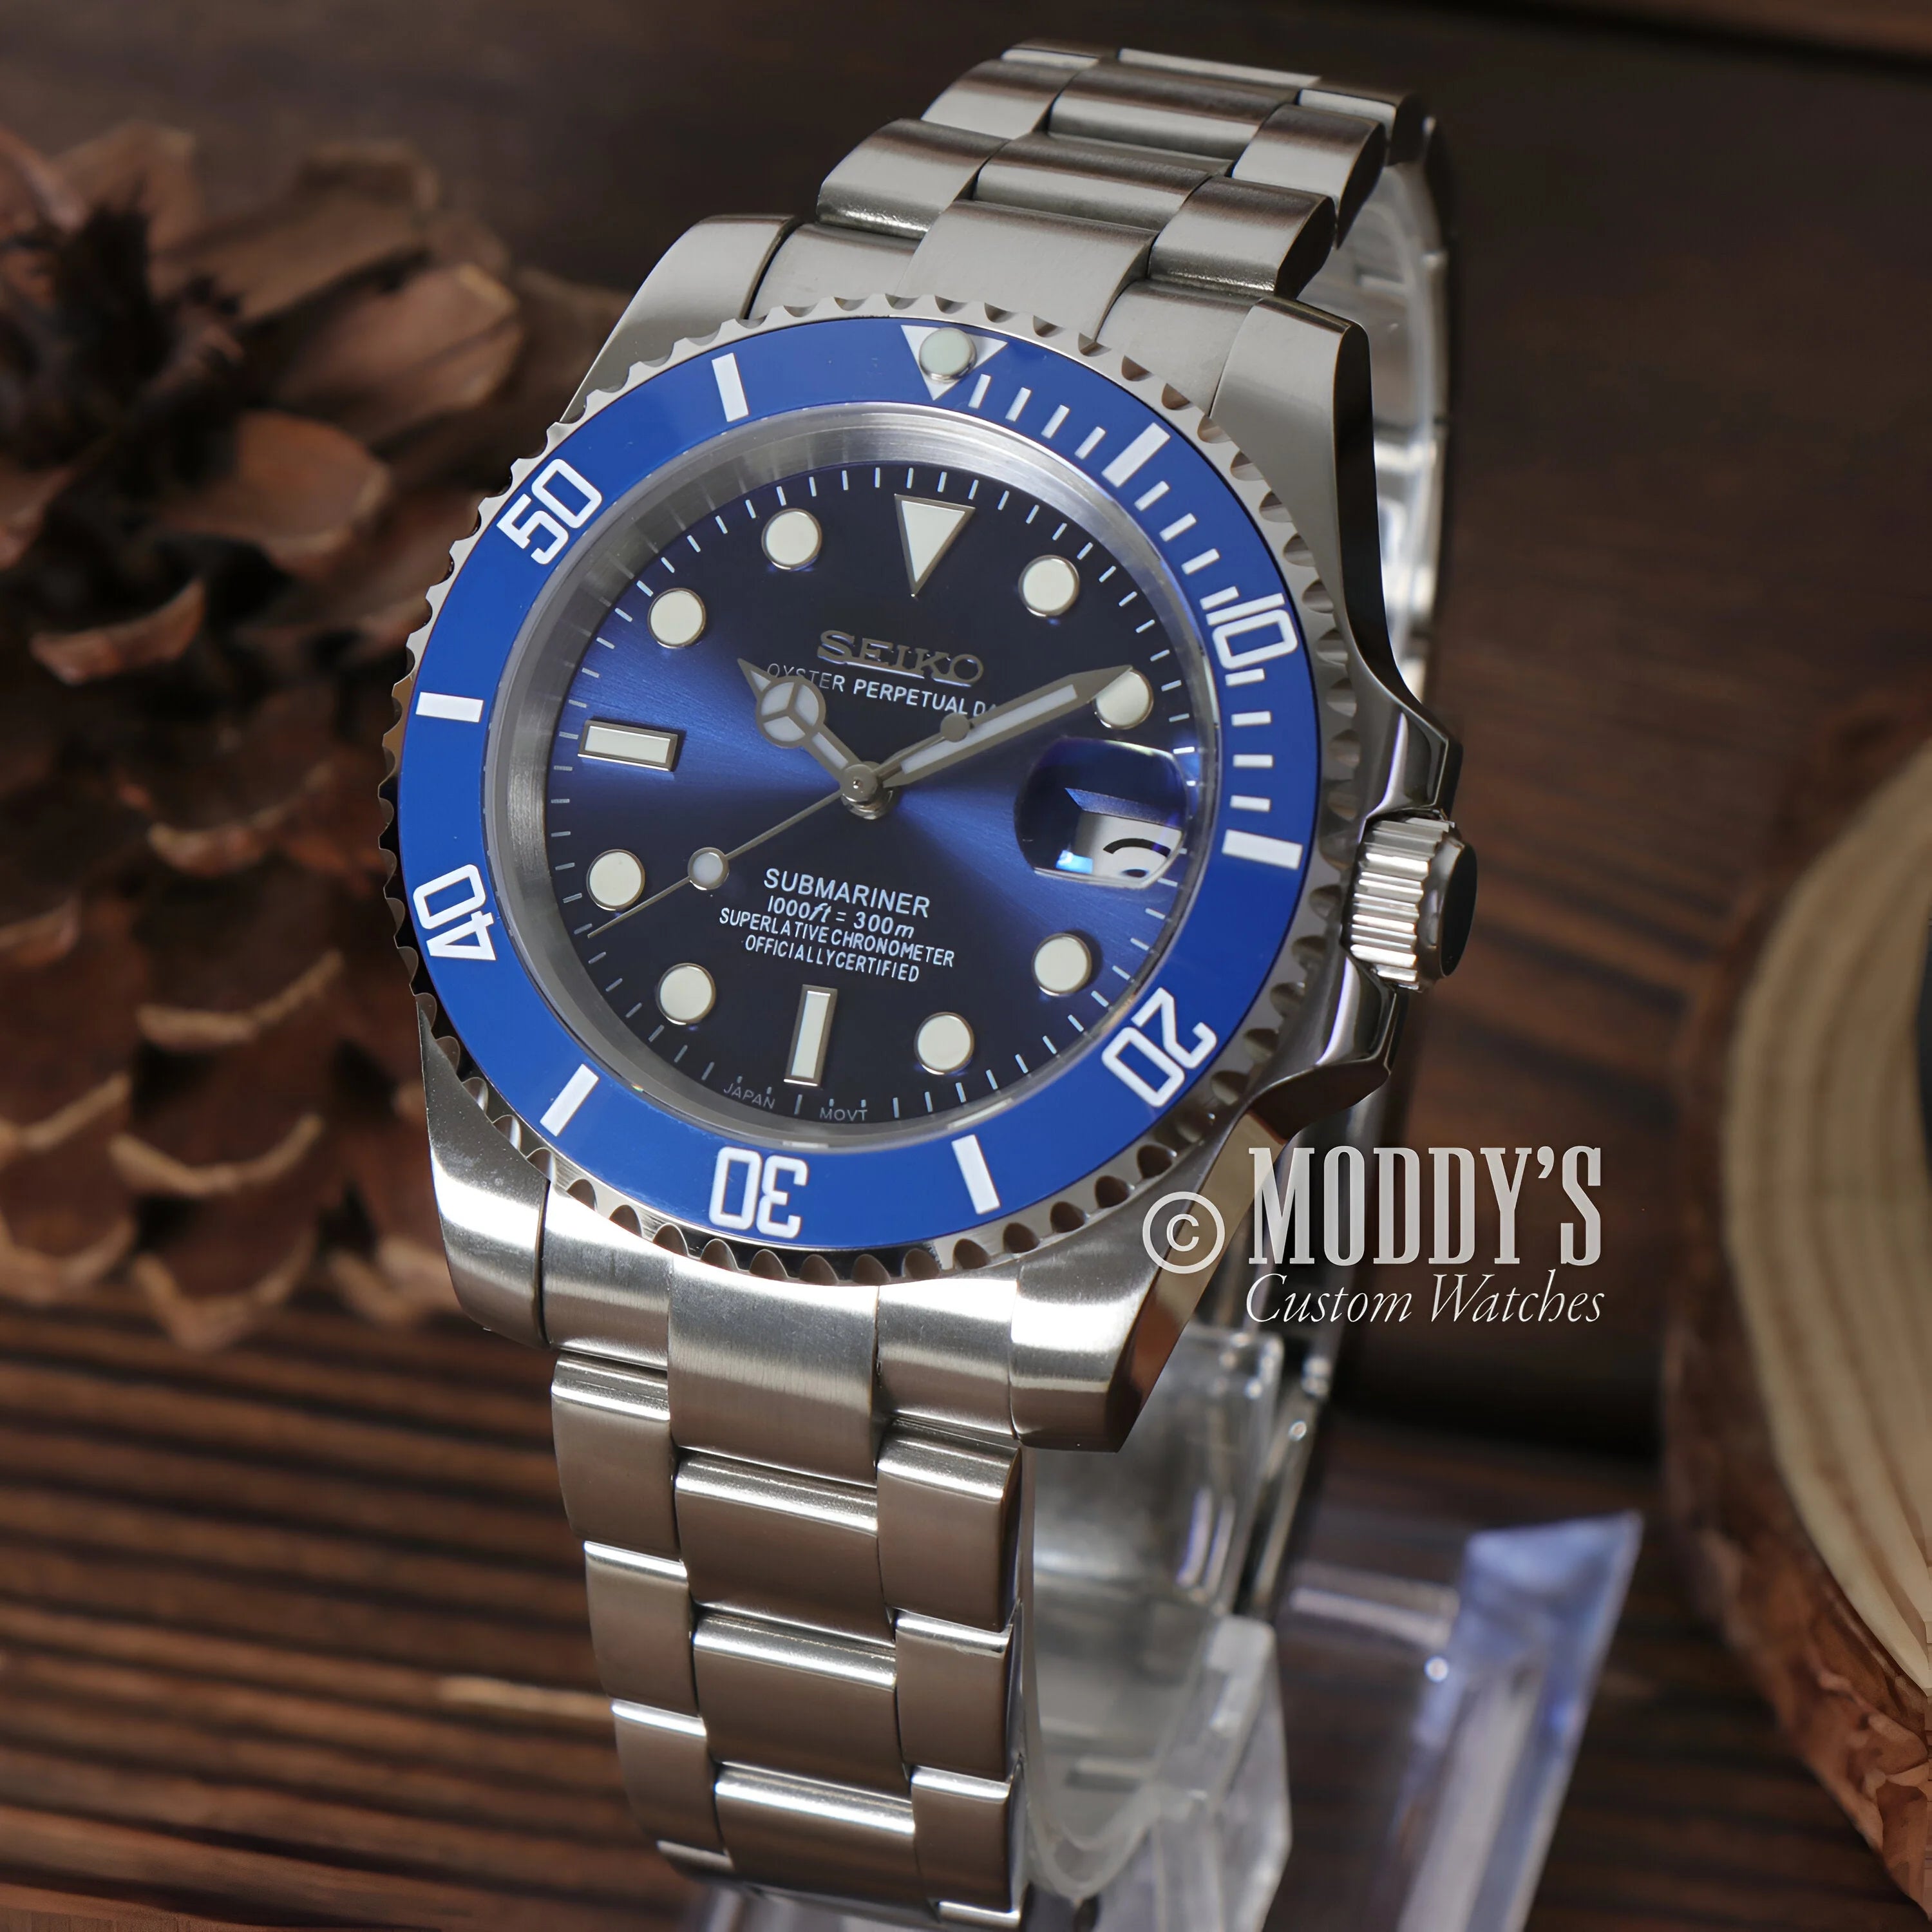 Seiko Mod Submariner Dive Watch With a Blue Dial And Bezel, Stainless Steel Bracelet